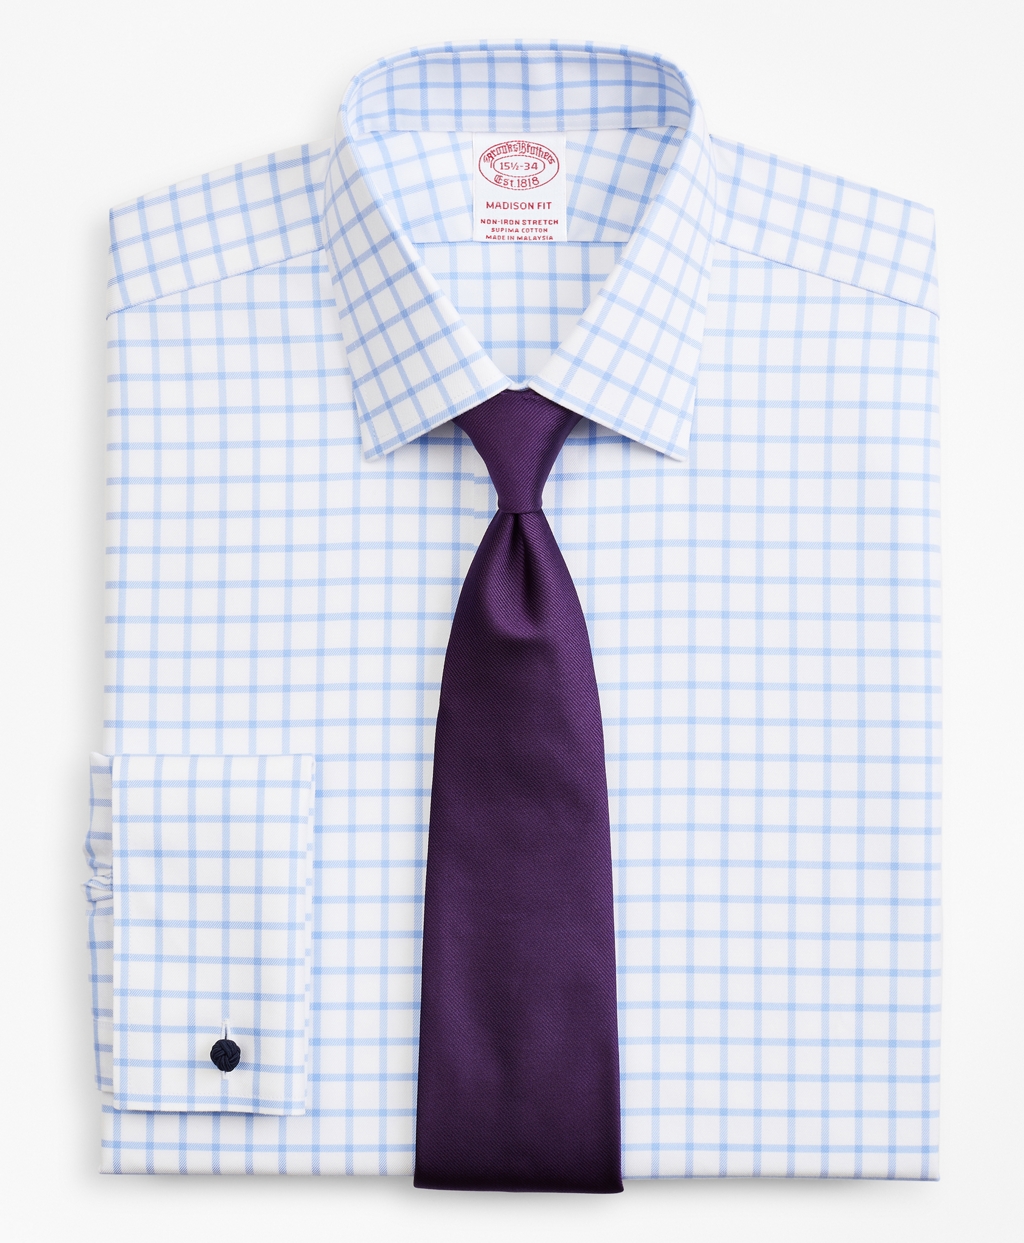 Brooksbrothers Stretch Madison Relaxed-Fit Dress Shirt, Non-Iron Twill Ainsley Collar French Cuff Grid Check